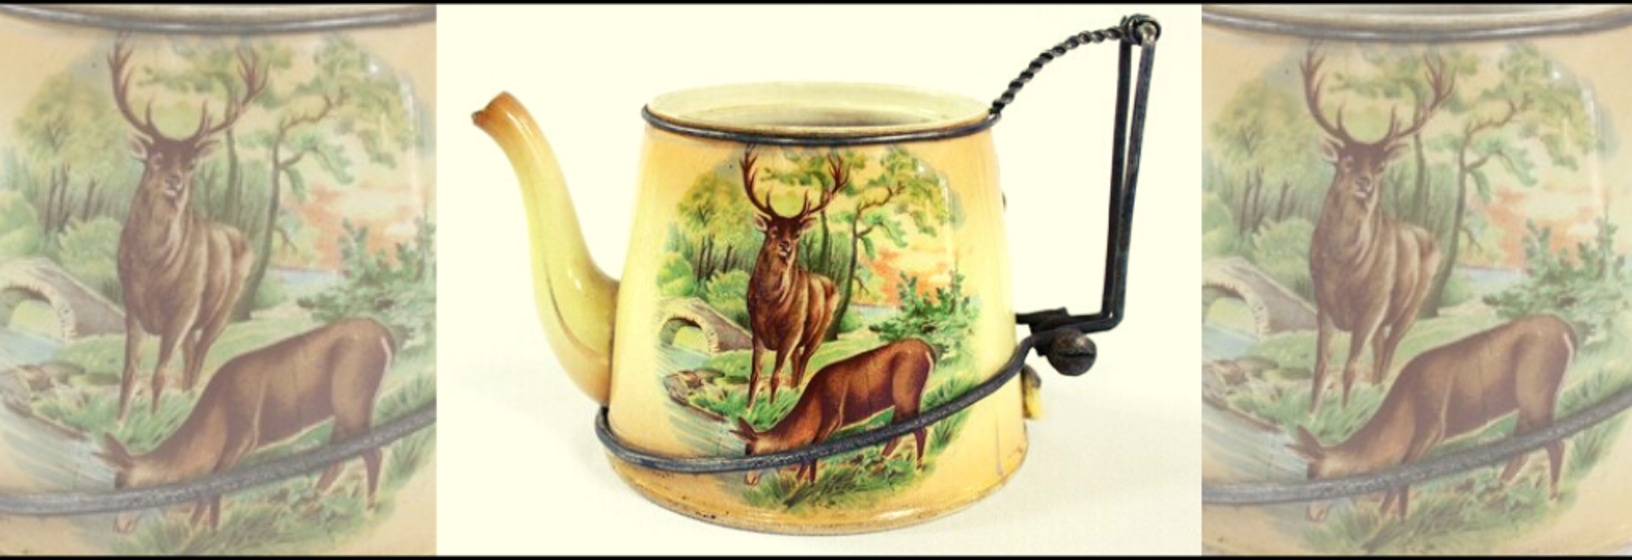 A ceramic teapot with a repaired metal handle. The teapot features a design with a woodland scene with two deer. 